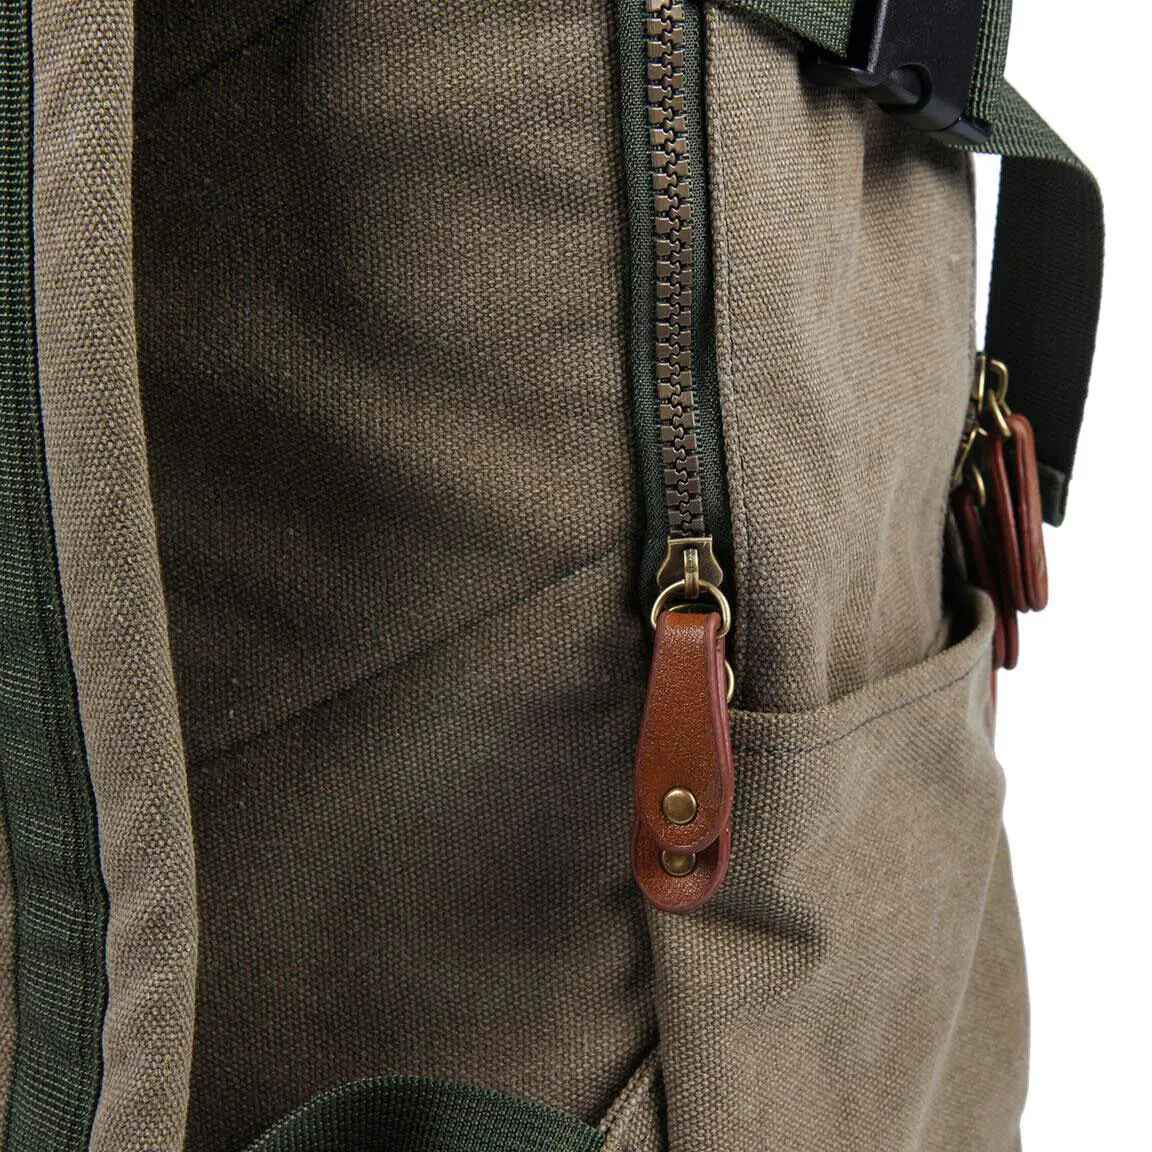 Star Wars The Mandalorian Backpack The Child (photo 9)